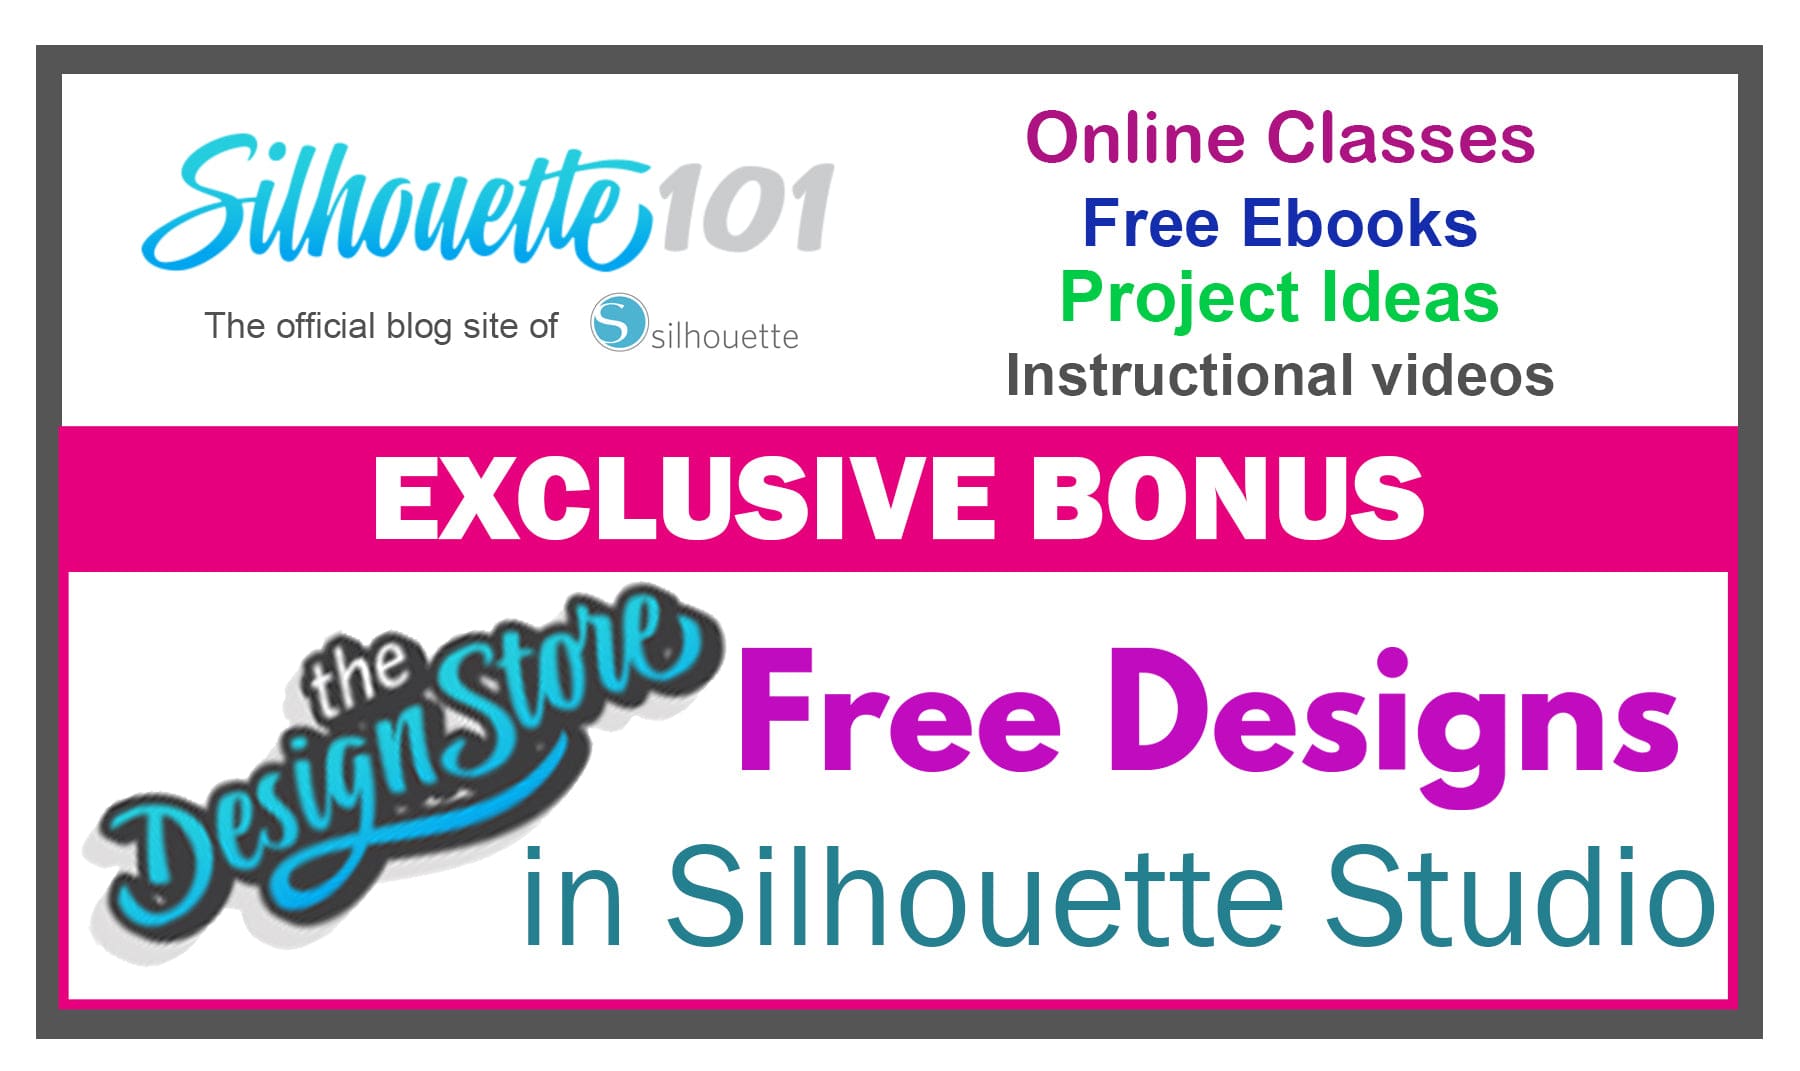 Silhouette America Craft Cutters Silhouette Cameo 4 Plus Bundle with 2 Autoblades, 3 Different Cutting mats, CC Vinyl Tool Kit, 100 Designs, and Access to Ebooks, Classes and More